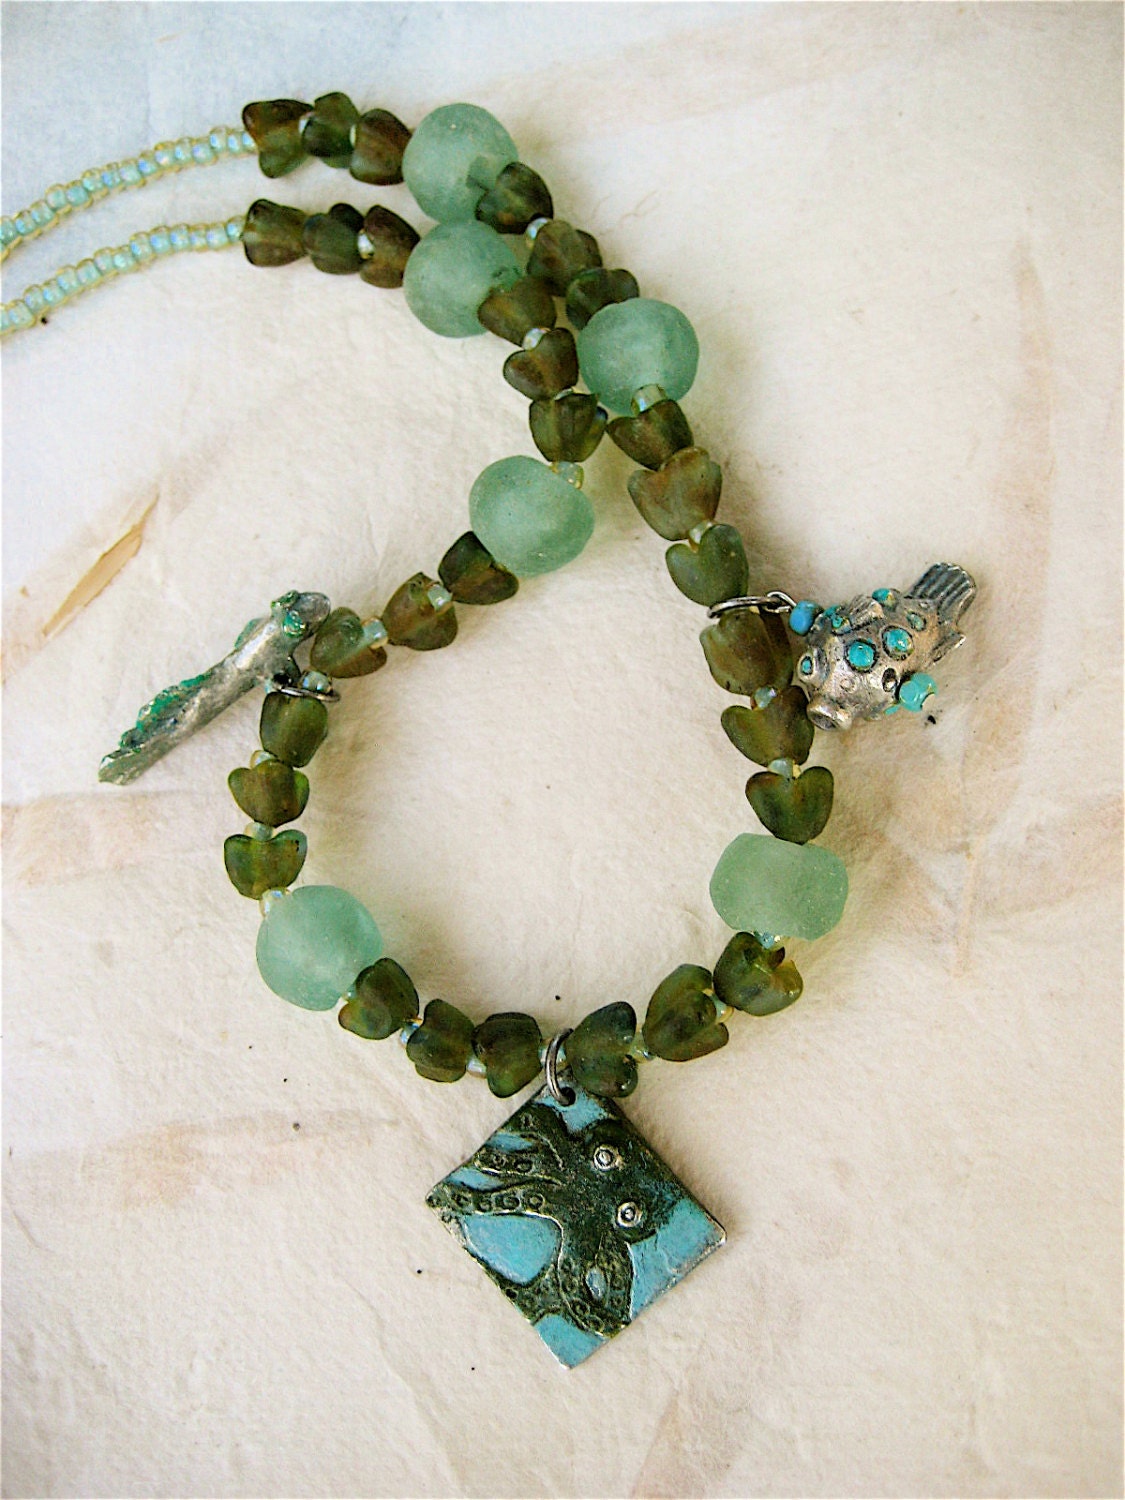 Green Octopus Necklace with Artisan Pendant and green and Aqua Recycled Glass Beads Undersea Theme - CatchingWaves